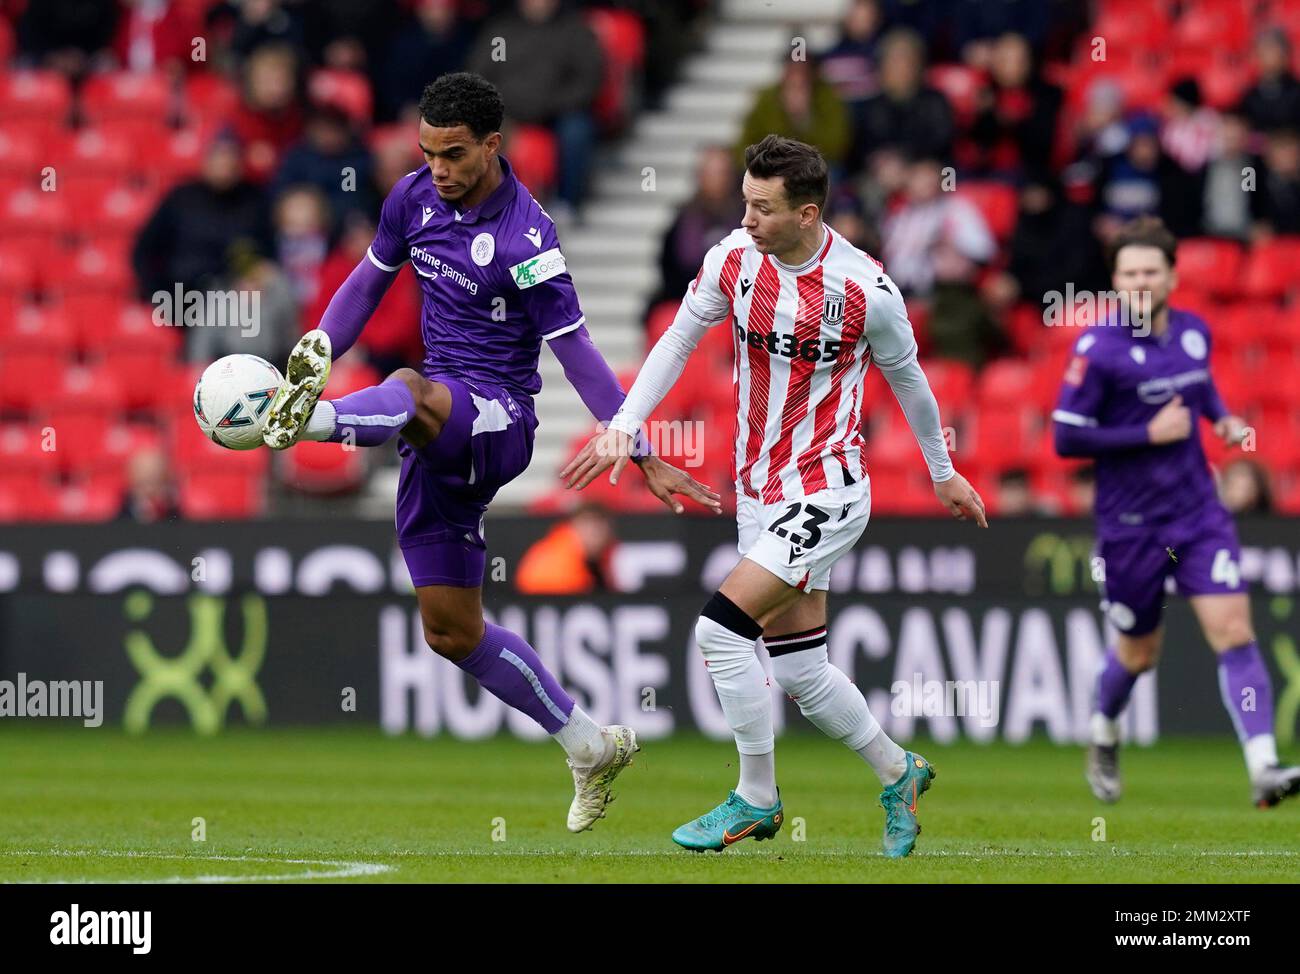 Stoke, UK. 29th Jan, 2023. Terence Vancooten of Stevenage challenged by Bersant Celina of Stoke City during the The FA Cup match at The Bet365 Stadium, Stoke. Picture credit should read: Andrew Yates/Sportimage Credit: Sportimage/Alamy Live News Stock Photo